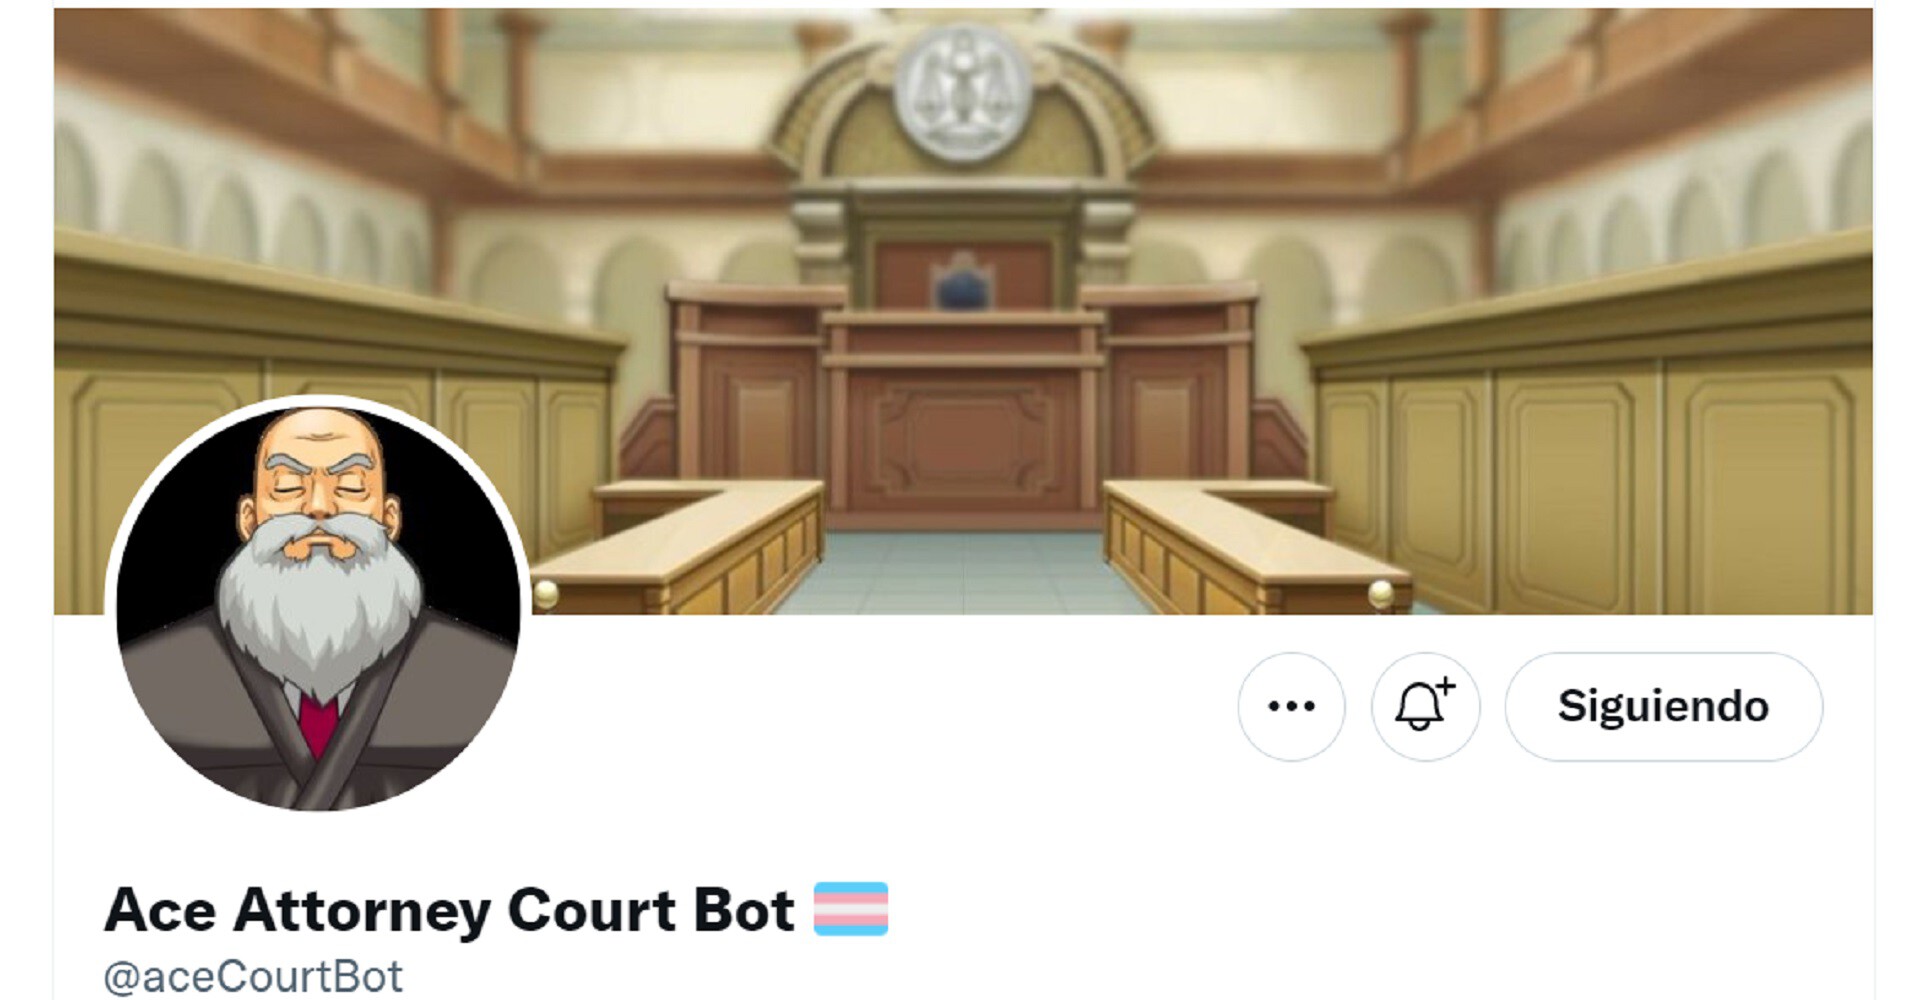 Ace Attorney Court Bot